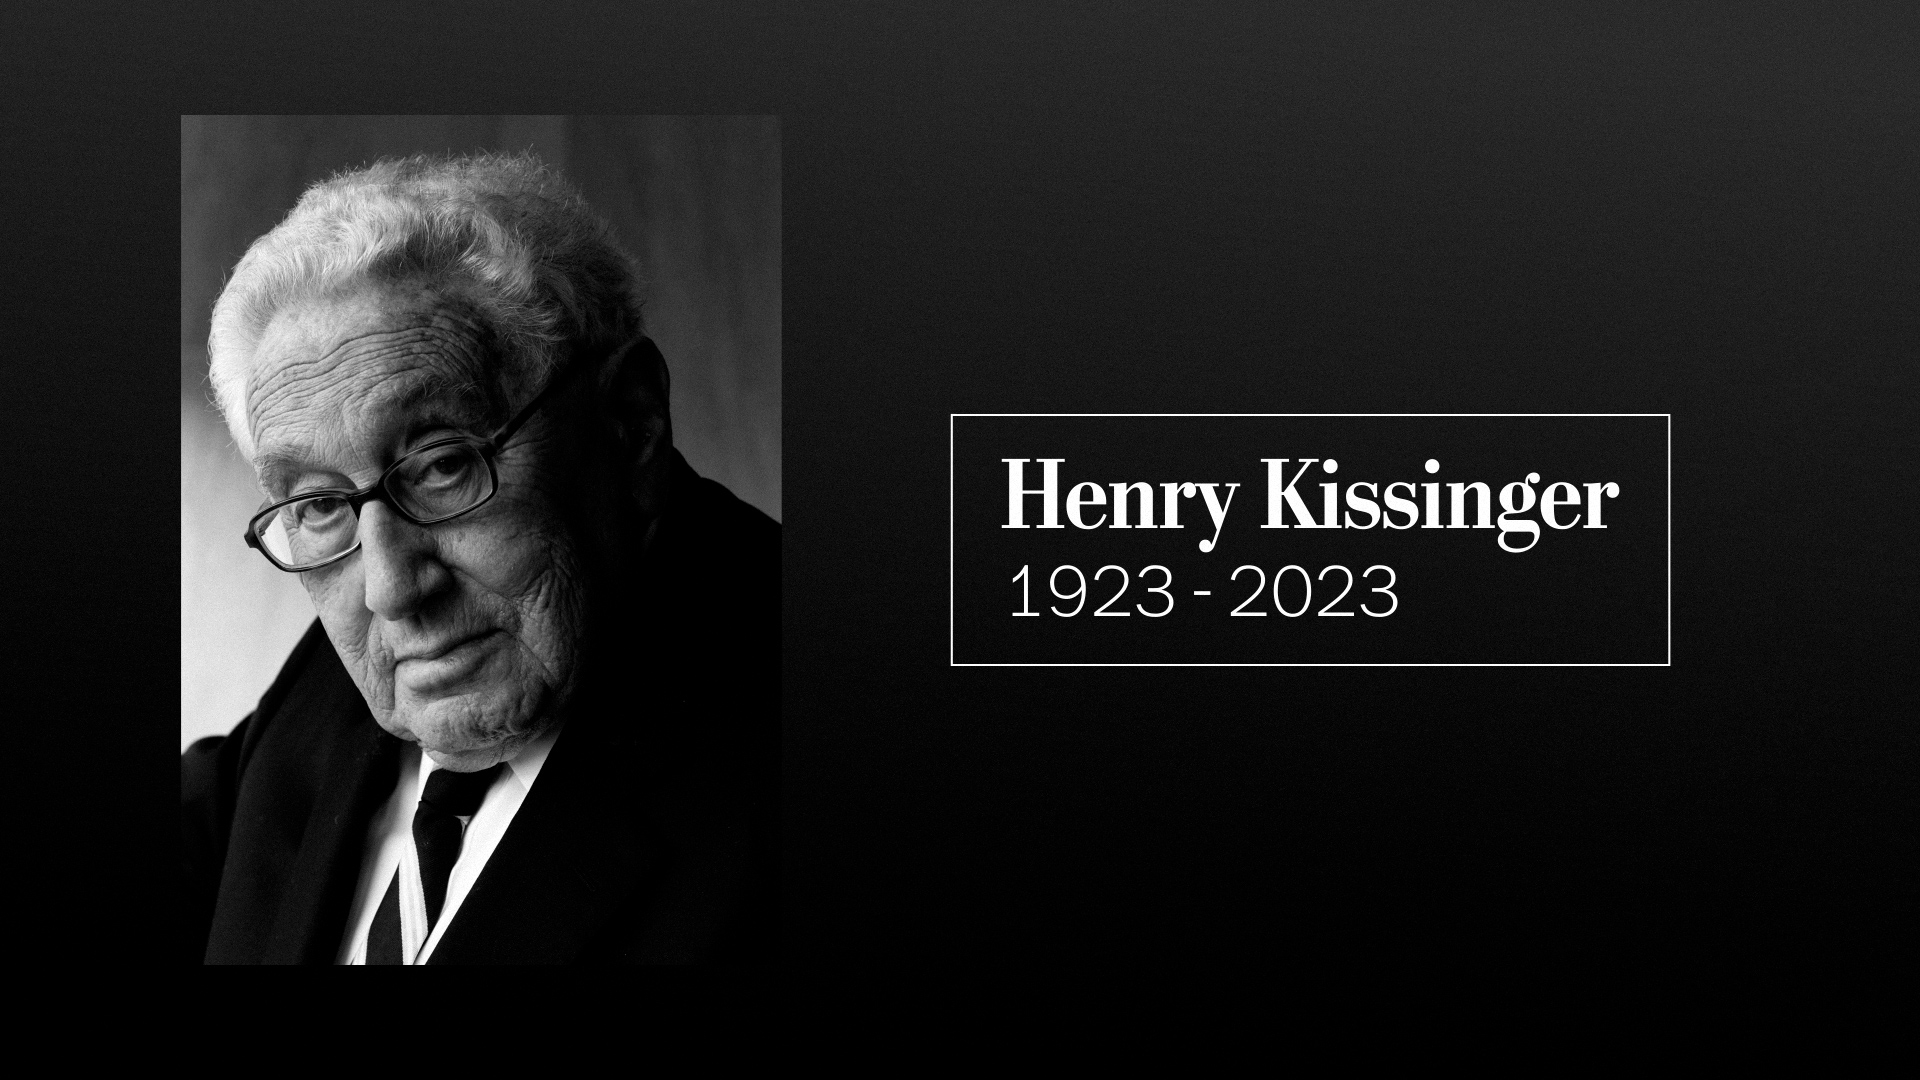 Henry Kissinger, who shaped world affairs under two presidents, dies at 100